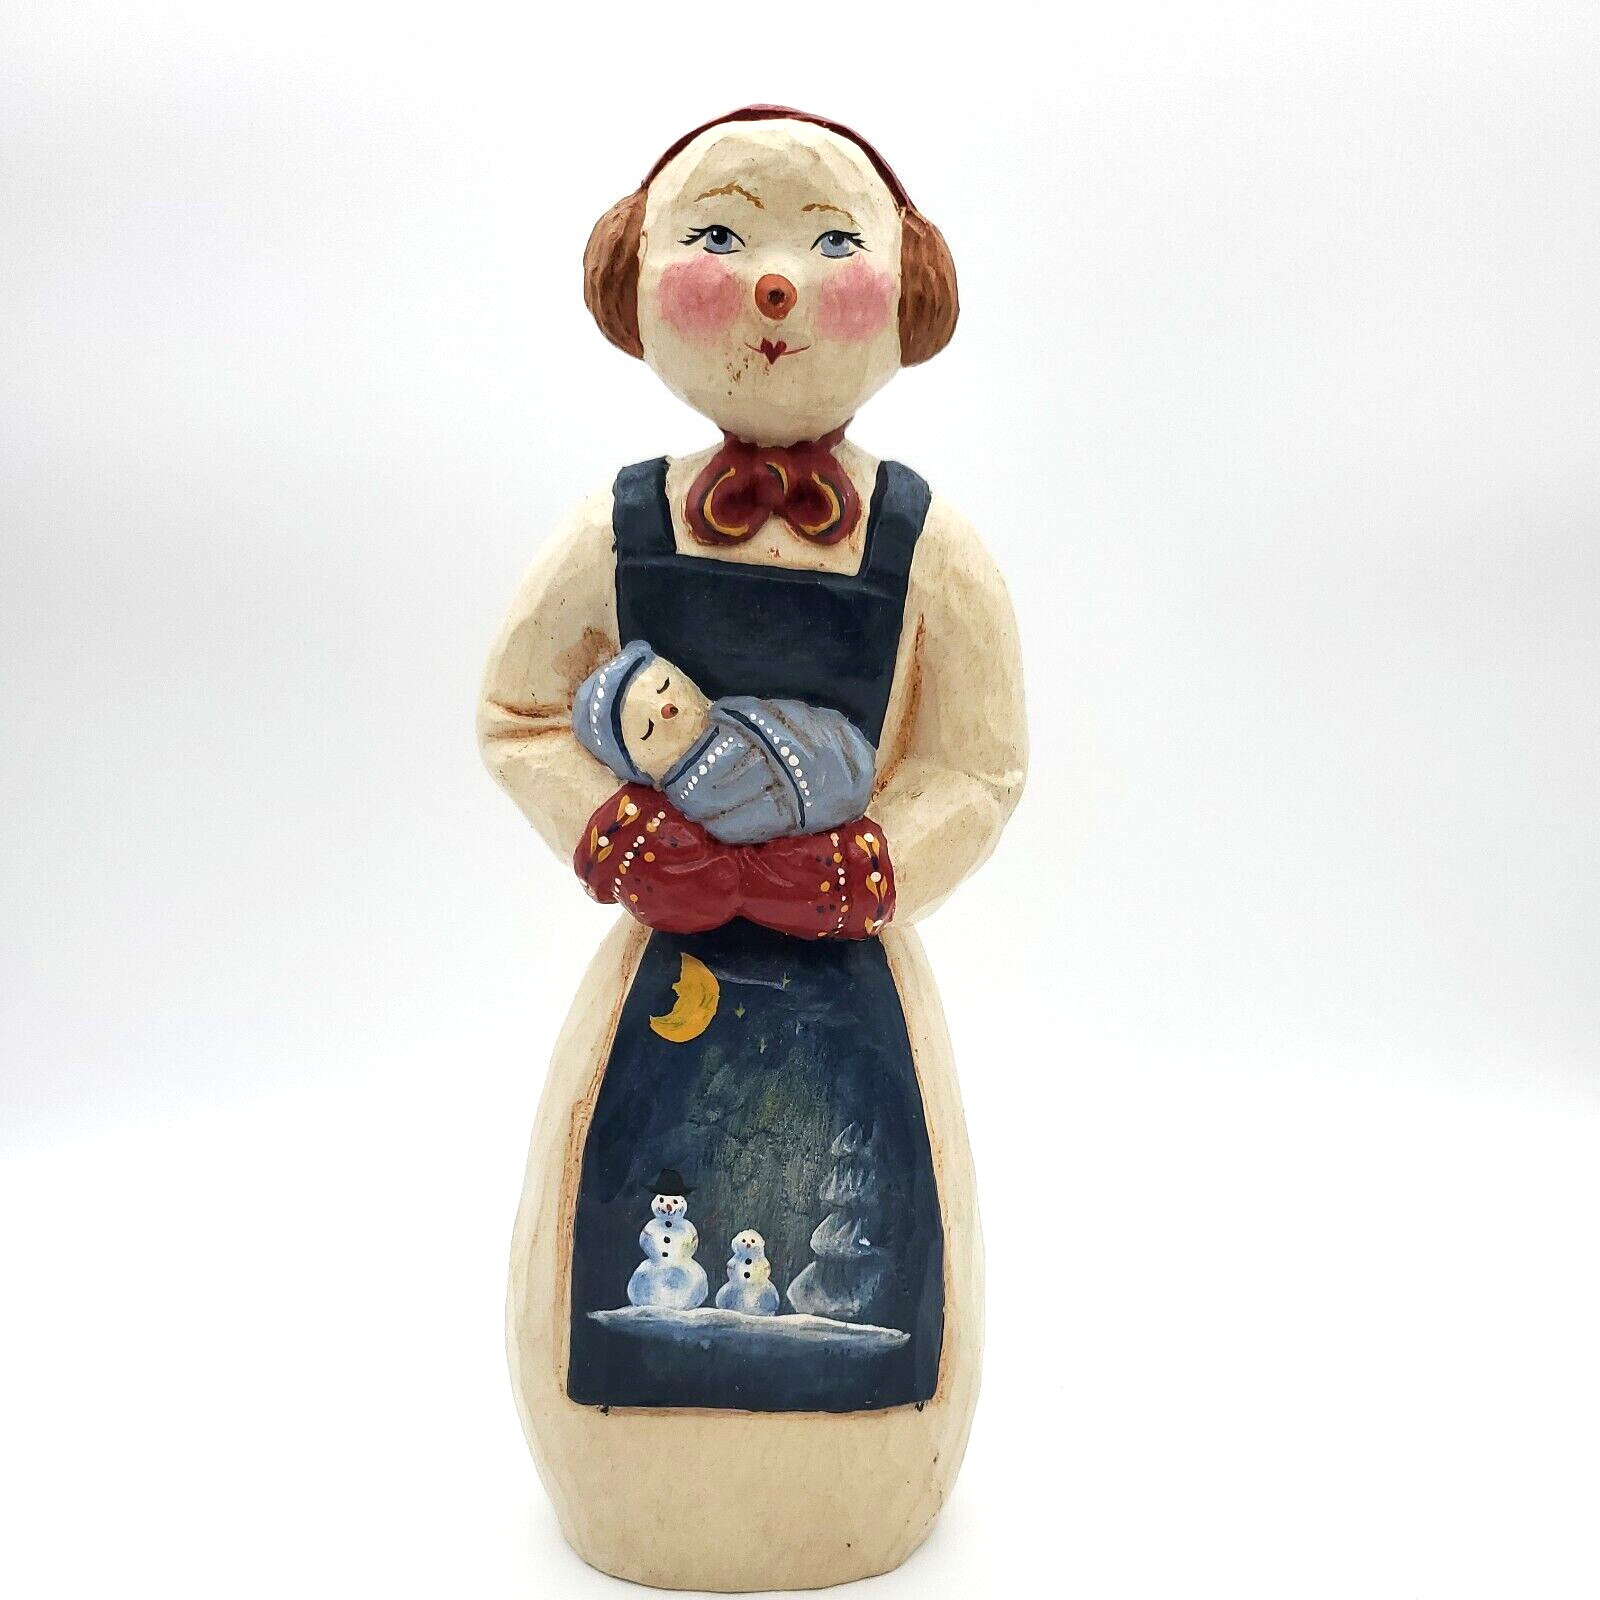 House of Hatten Snowman Mom & Baby Figurine 10" Tall Handcrafted Rare & Unique!